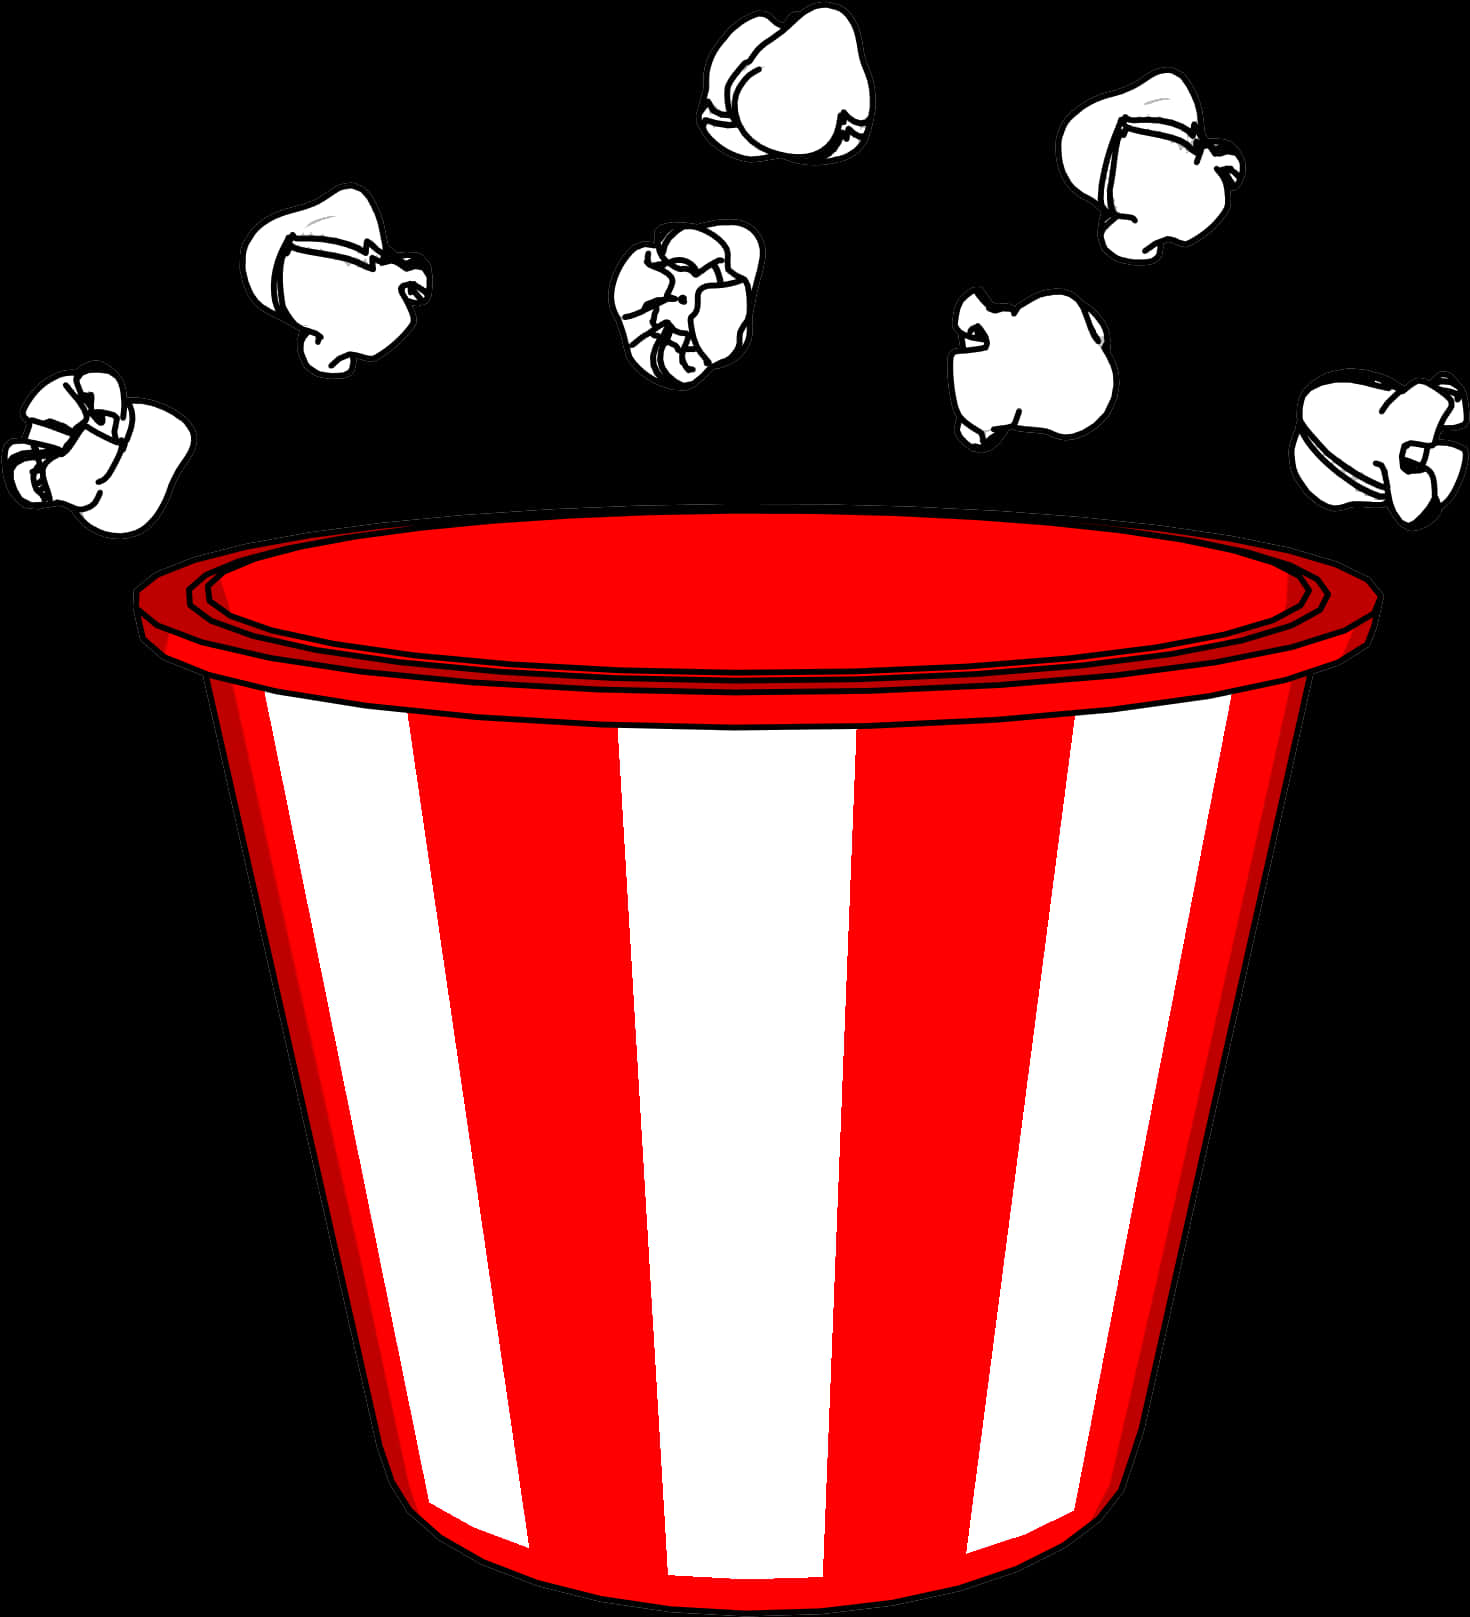 A Red And White Striped Bucket With Popcorn Flying Out Of It